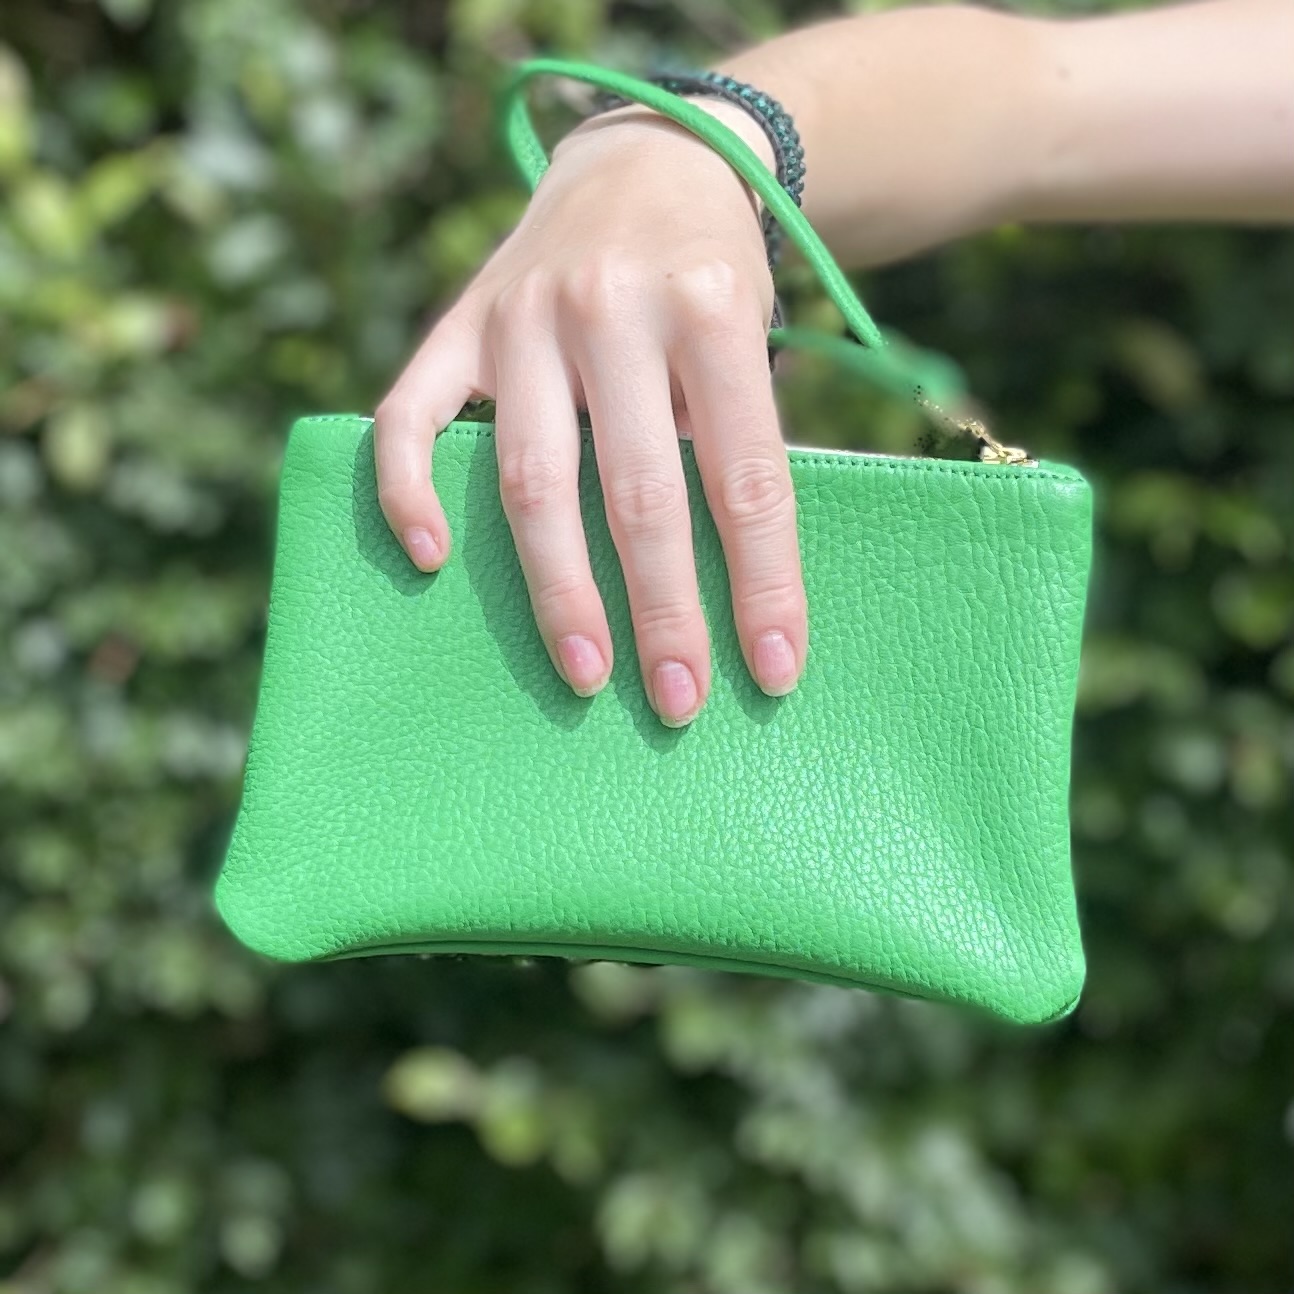 Pearl Neon Green Clutch With the Snake Chain, Pearlescent Green Acrylic  Clutch, Neon Green Acrylic Clutch, Evening Clutch, Party Clutch - Etsy